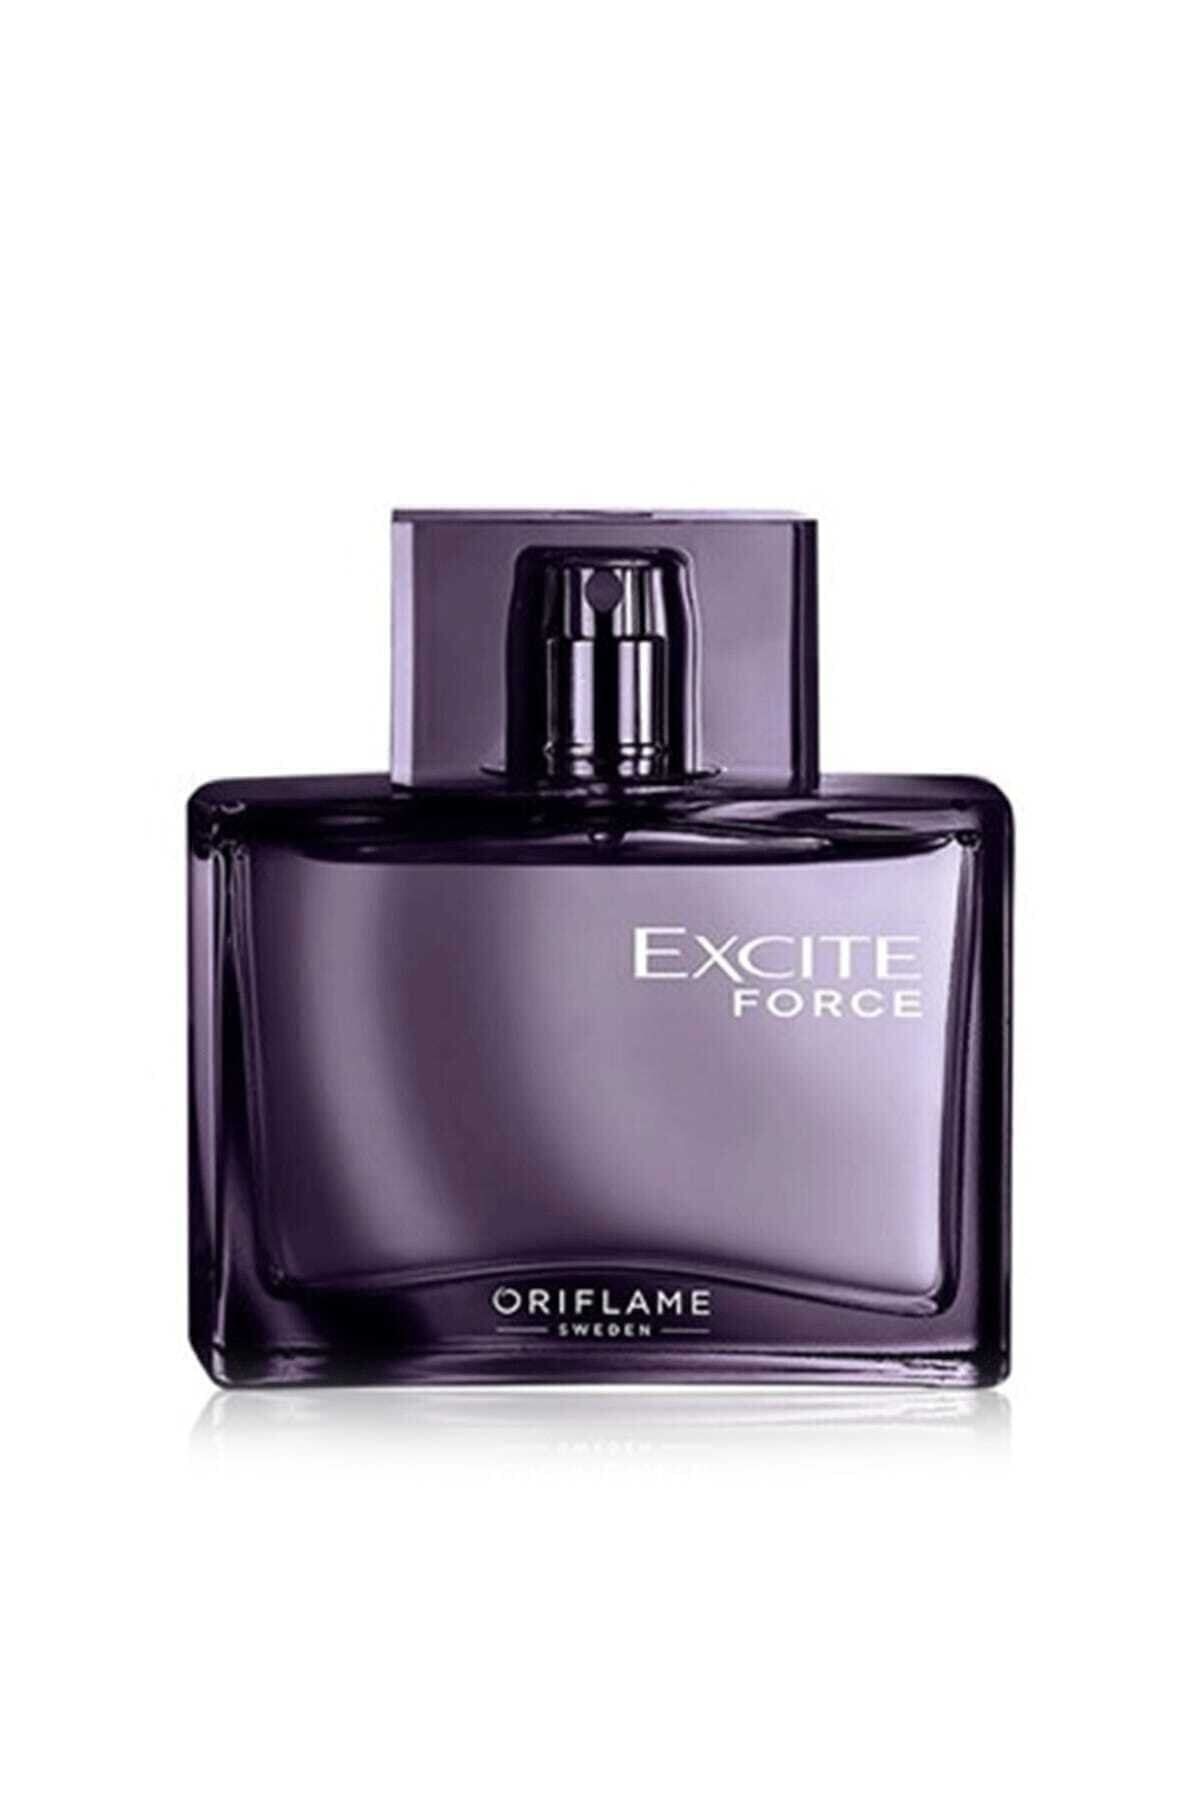 Oriflame Excite Force Edt 75 ml 5698544521256